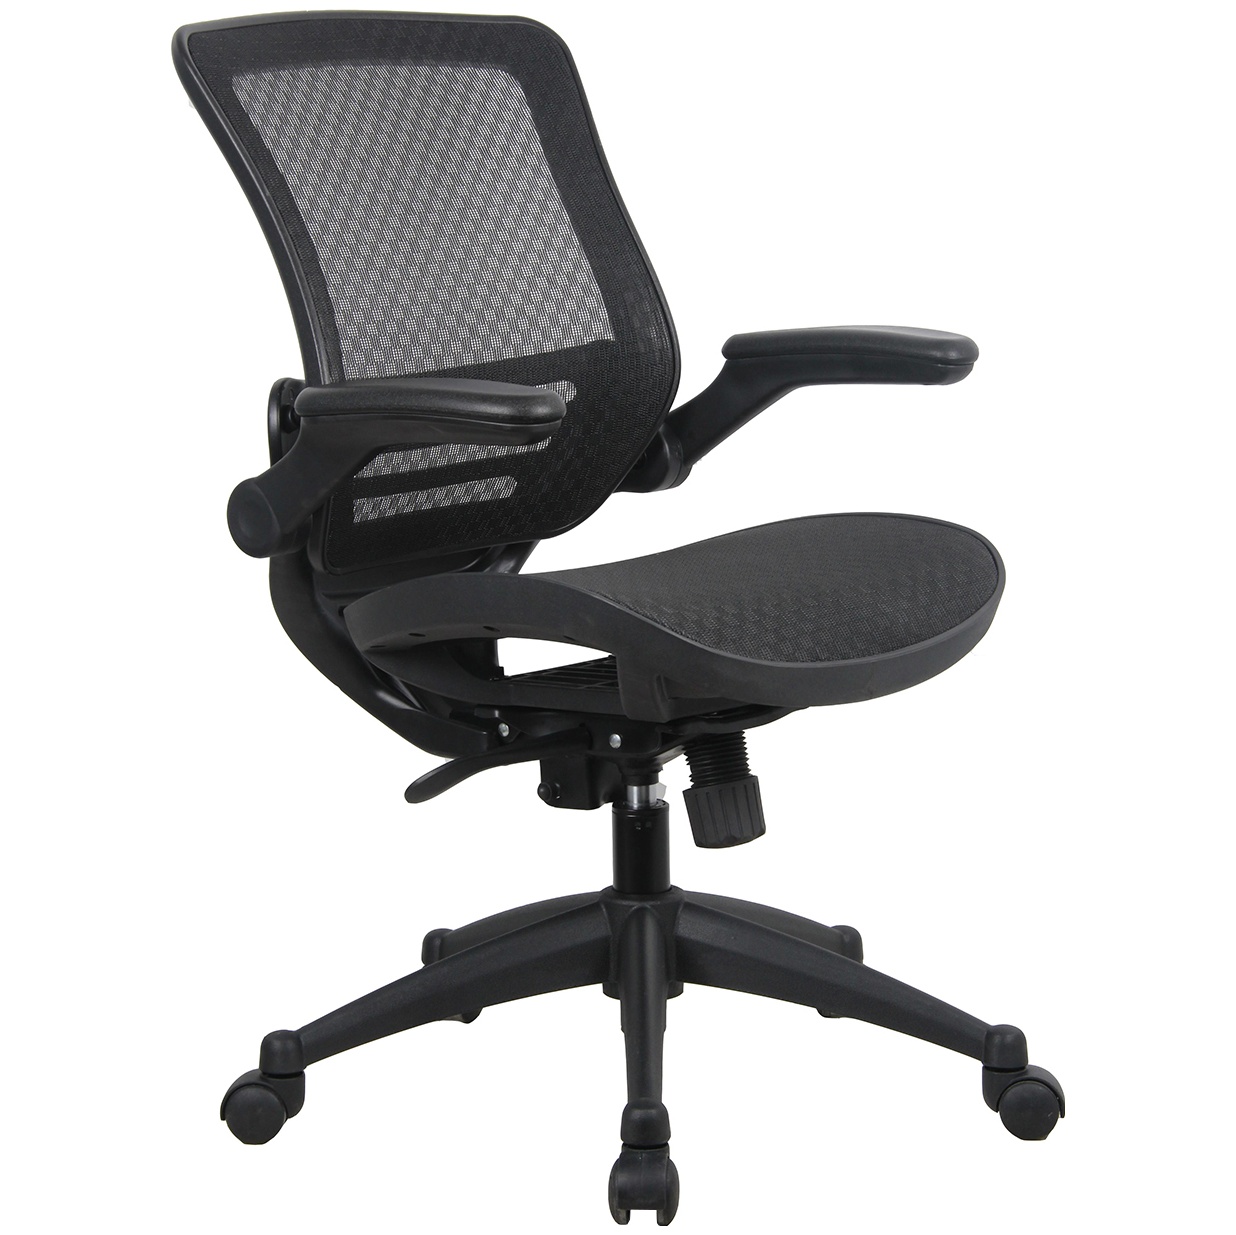 All Mesh Synchro Office Chair Operator Task Chairs